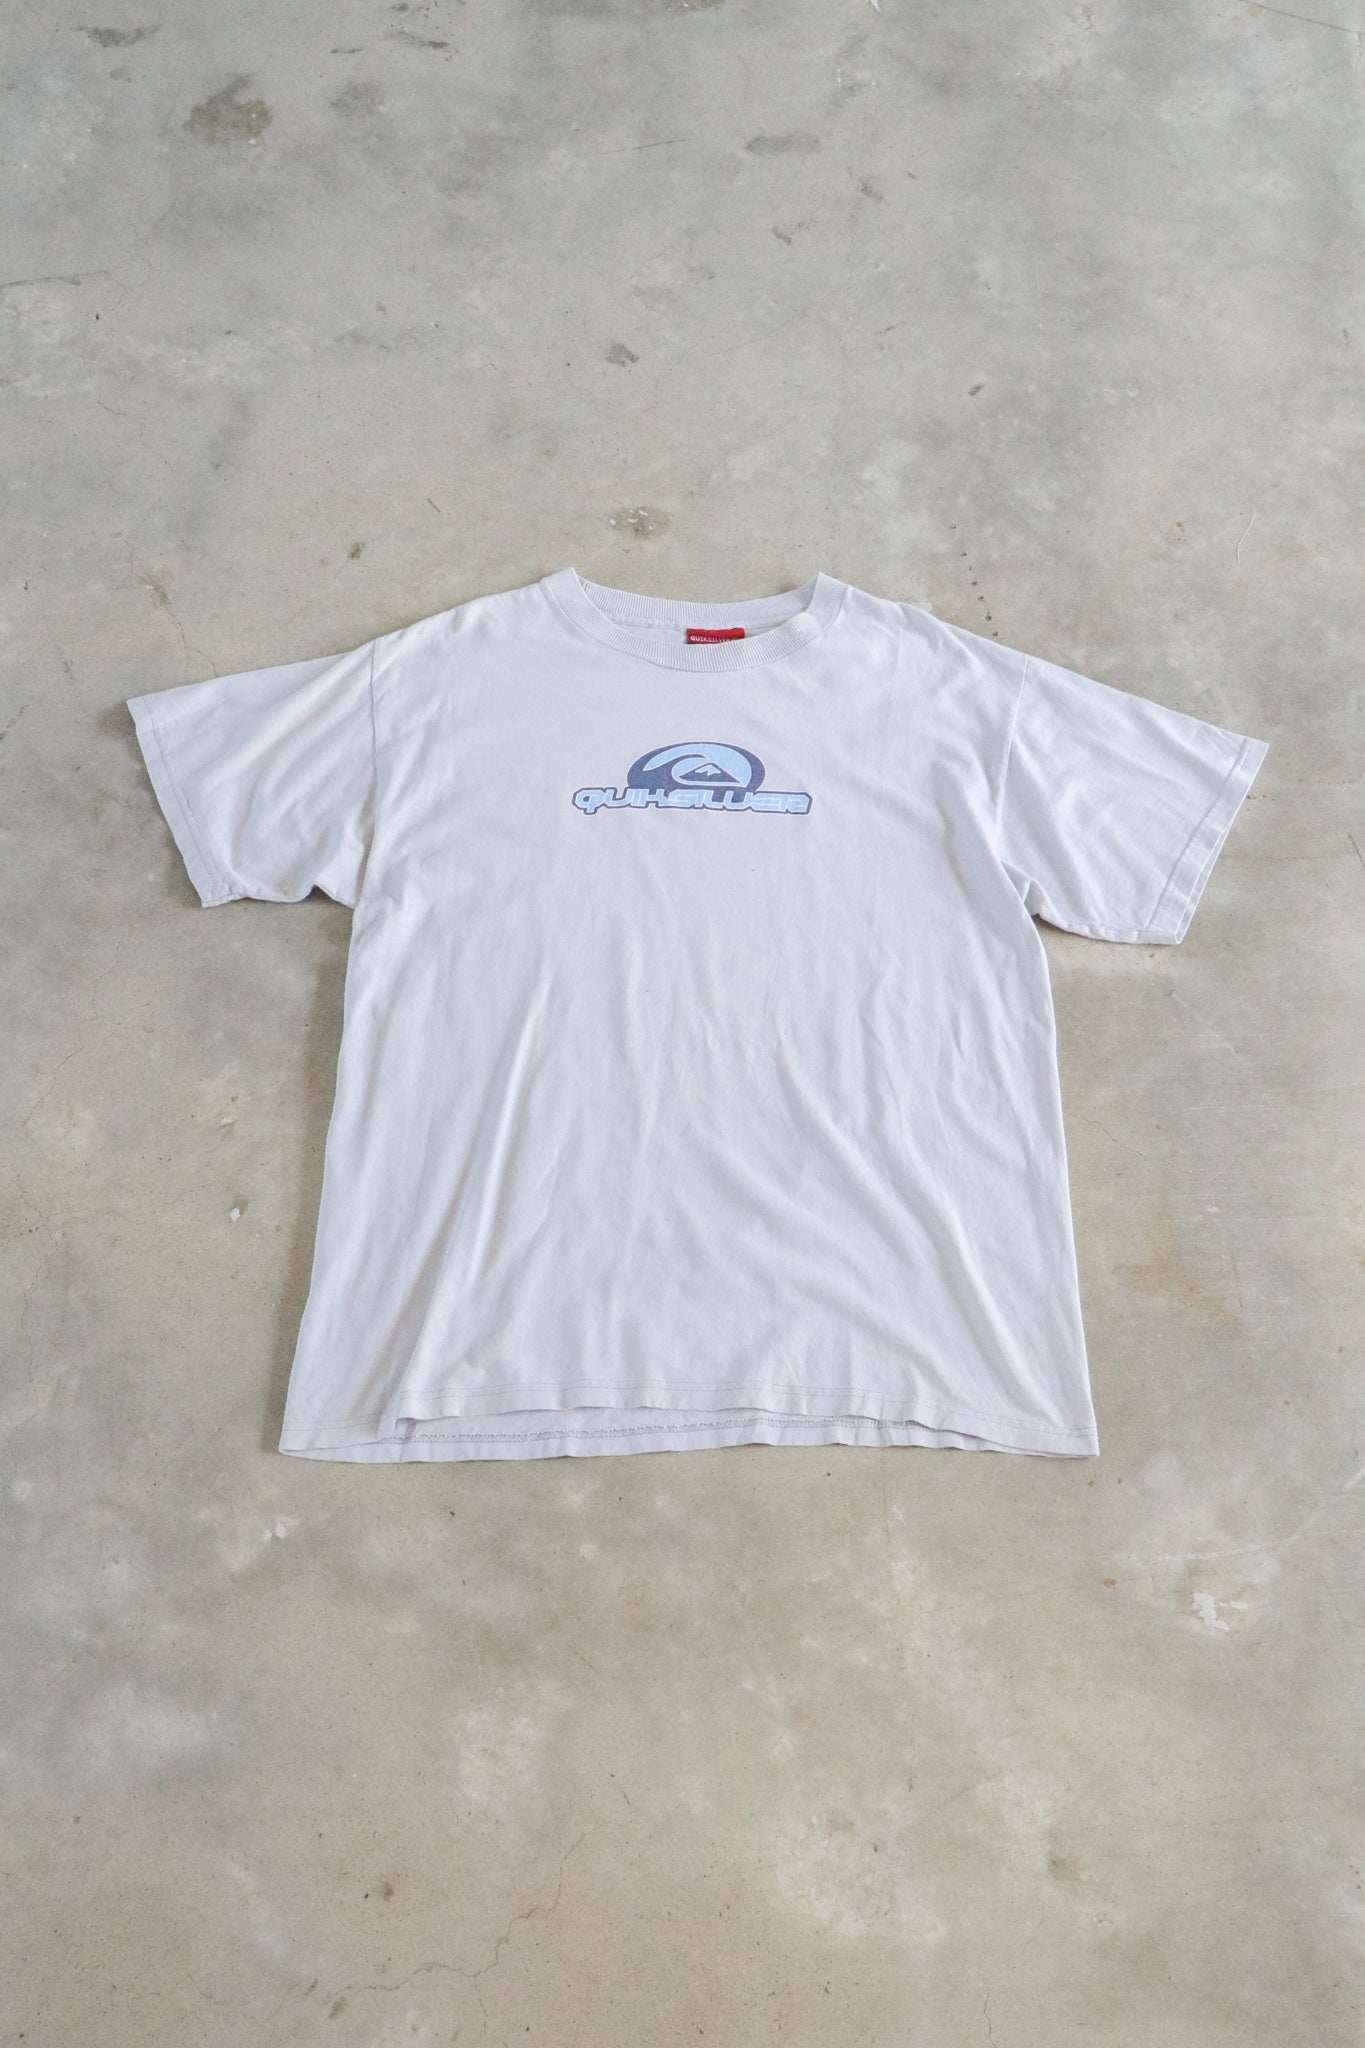 Vintage Quiksilver Spell Out Tee Medium